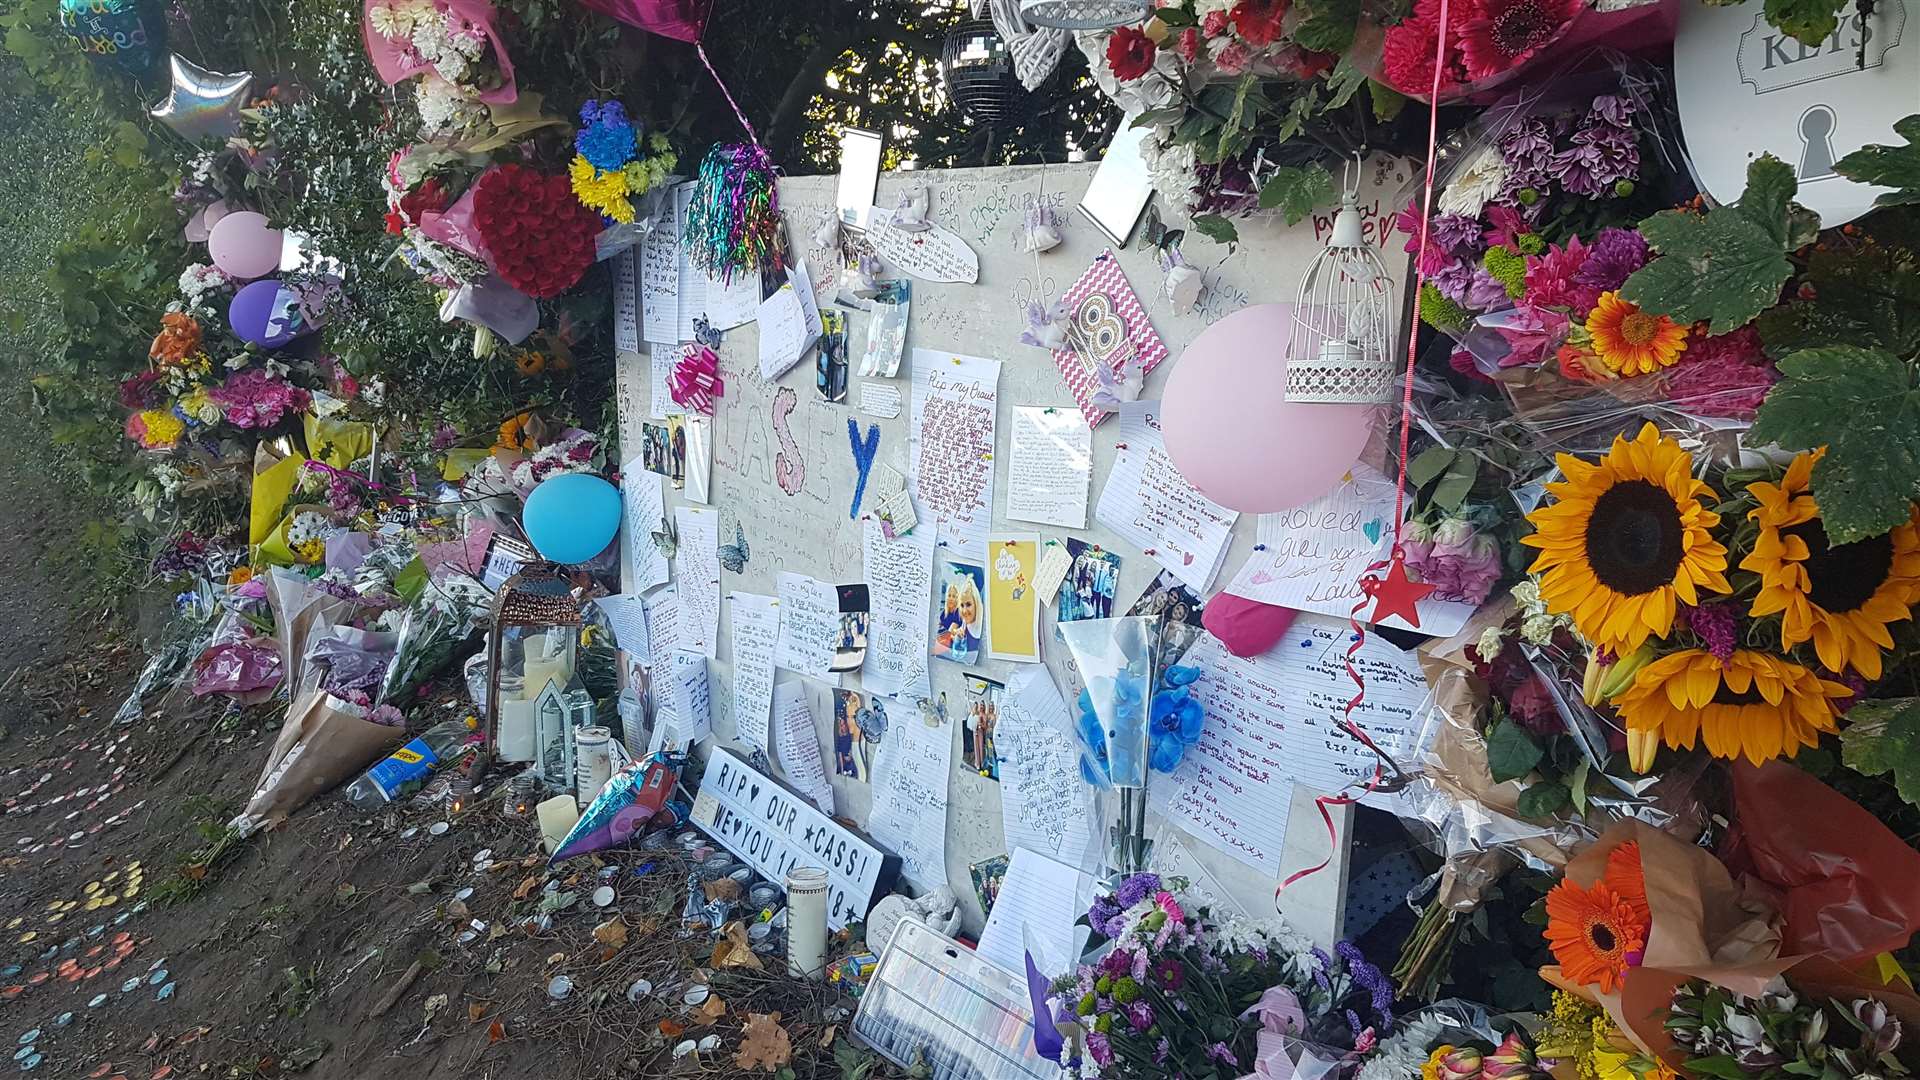 Floral tributes at the roadside after the Womenswold crash